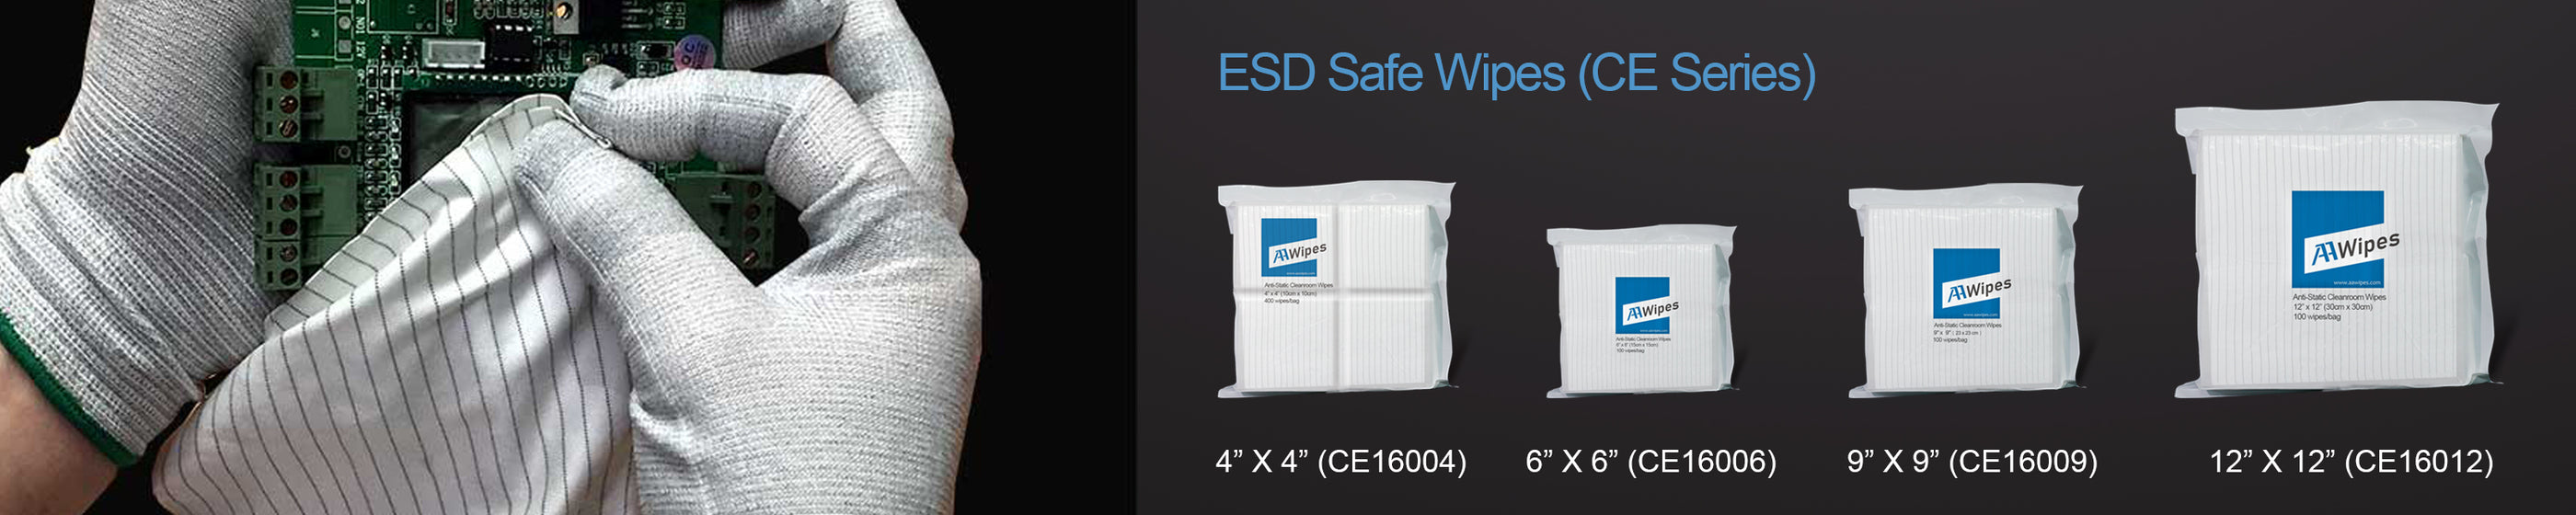 ESD Safe Wipes